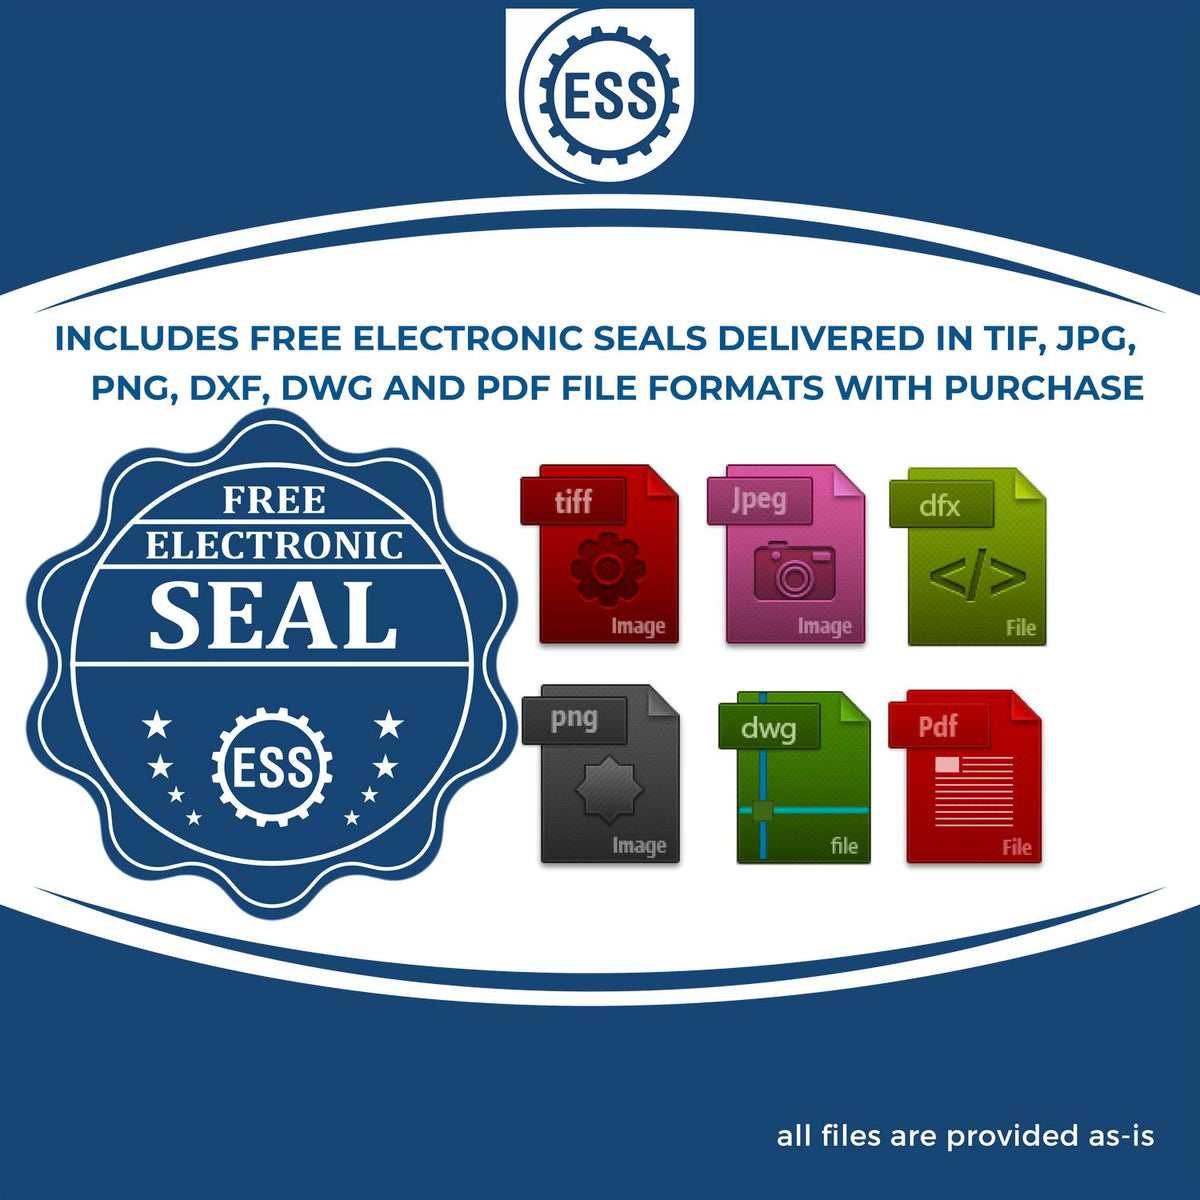 An infographic for the free electronic seal for the State of Mississippi Long Reach Architectural Embossing Seal illustrating the different file type icons such as DXF, DWG, TIF, JPG and PNG.